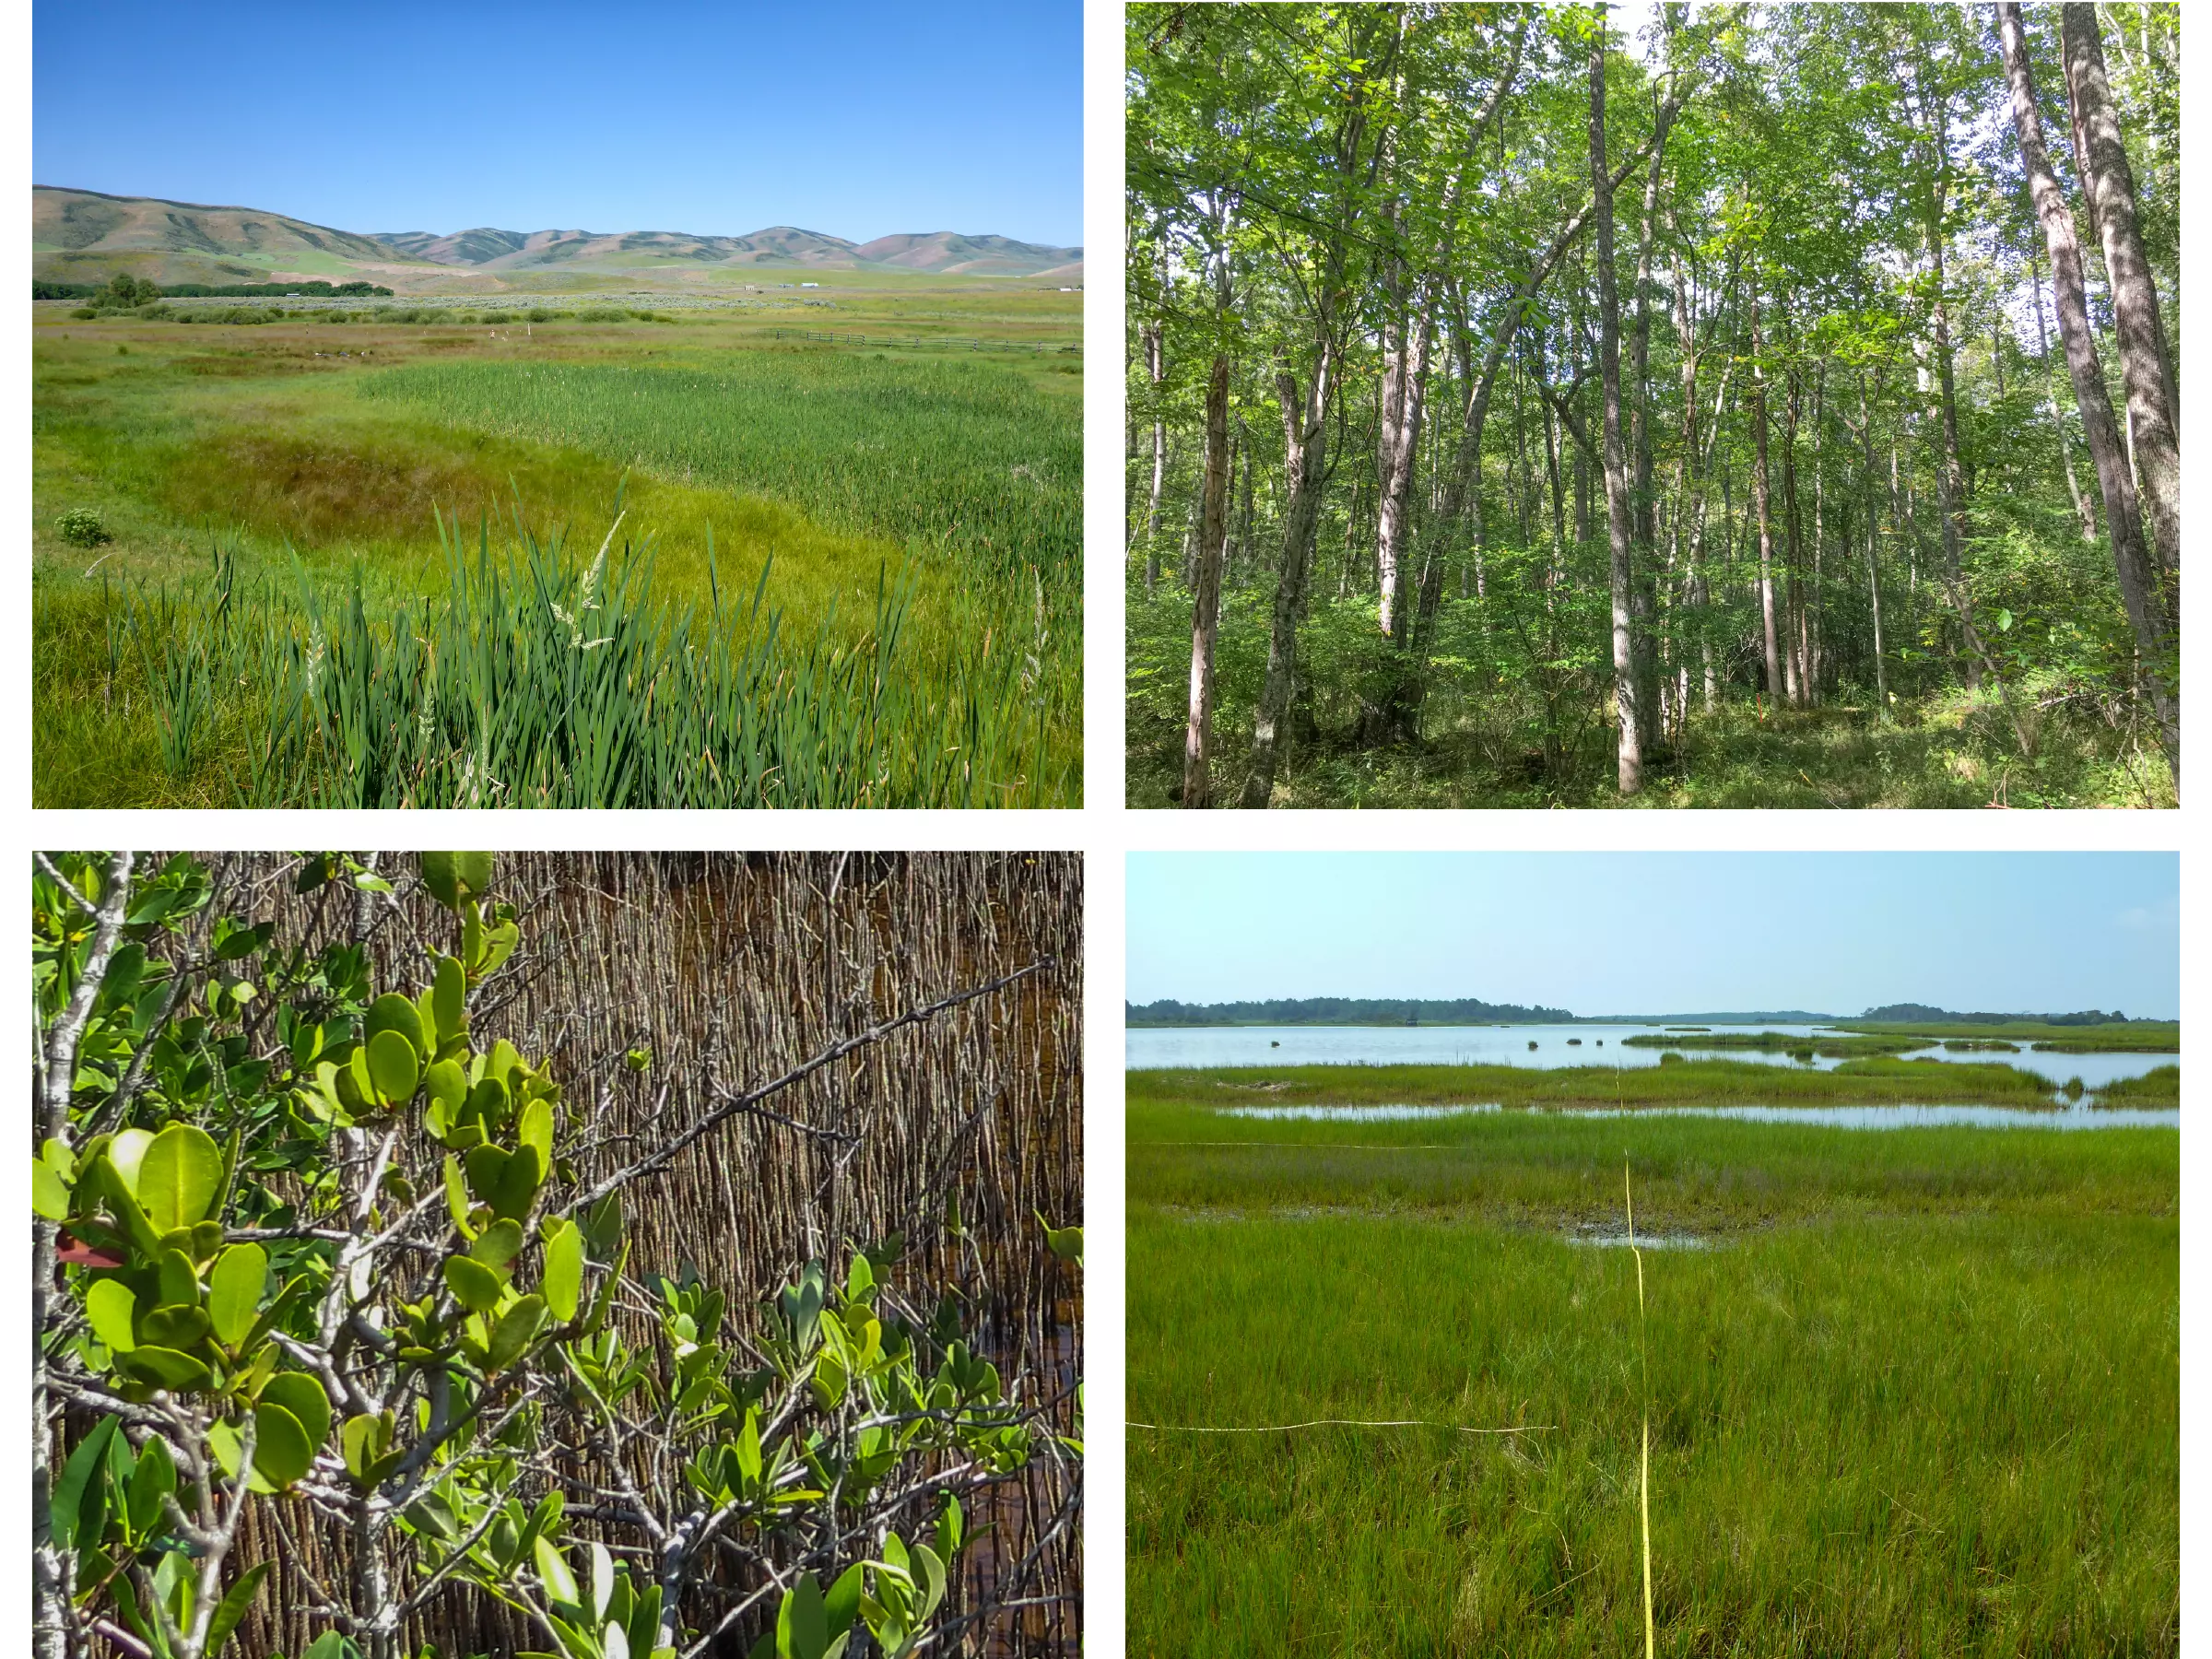 Going clockwise, a marsh with mountains in background, a deciduous forest, a salt marsh, and a closeup of shrubs mixed with grass.